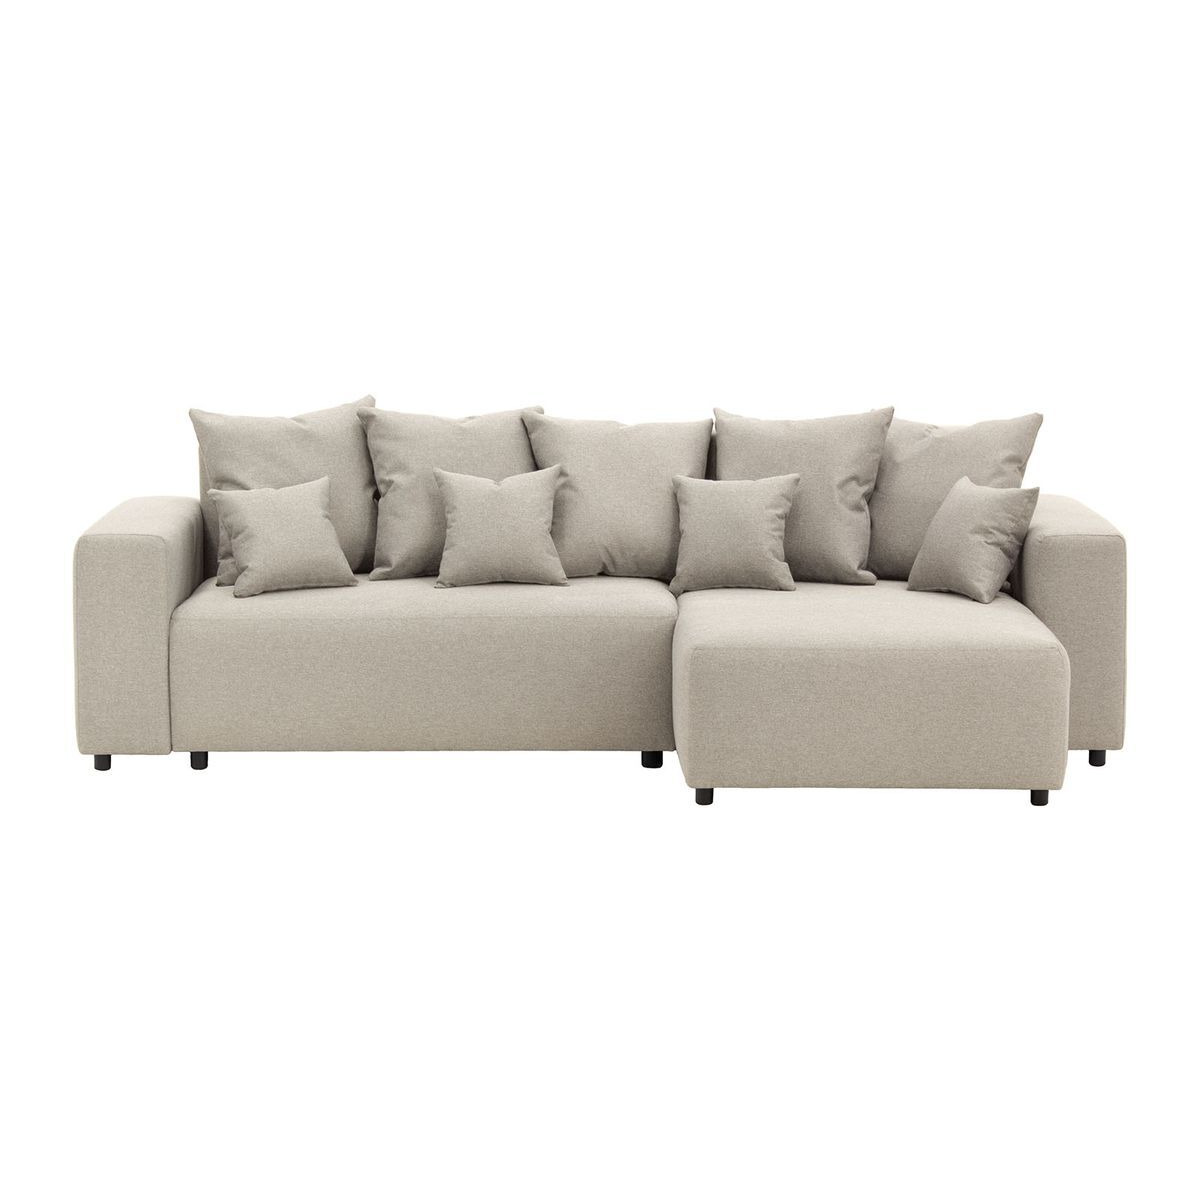 Homely Right Hand Corner Sofa Bed, cream - image 1